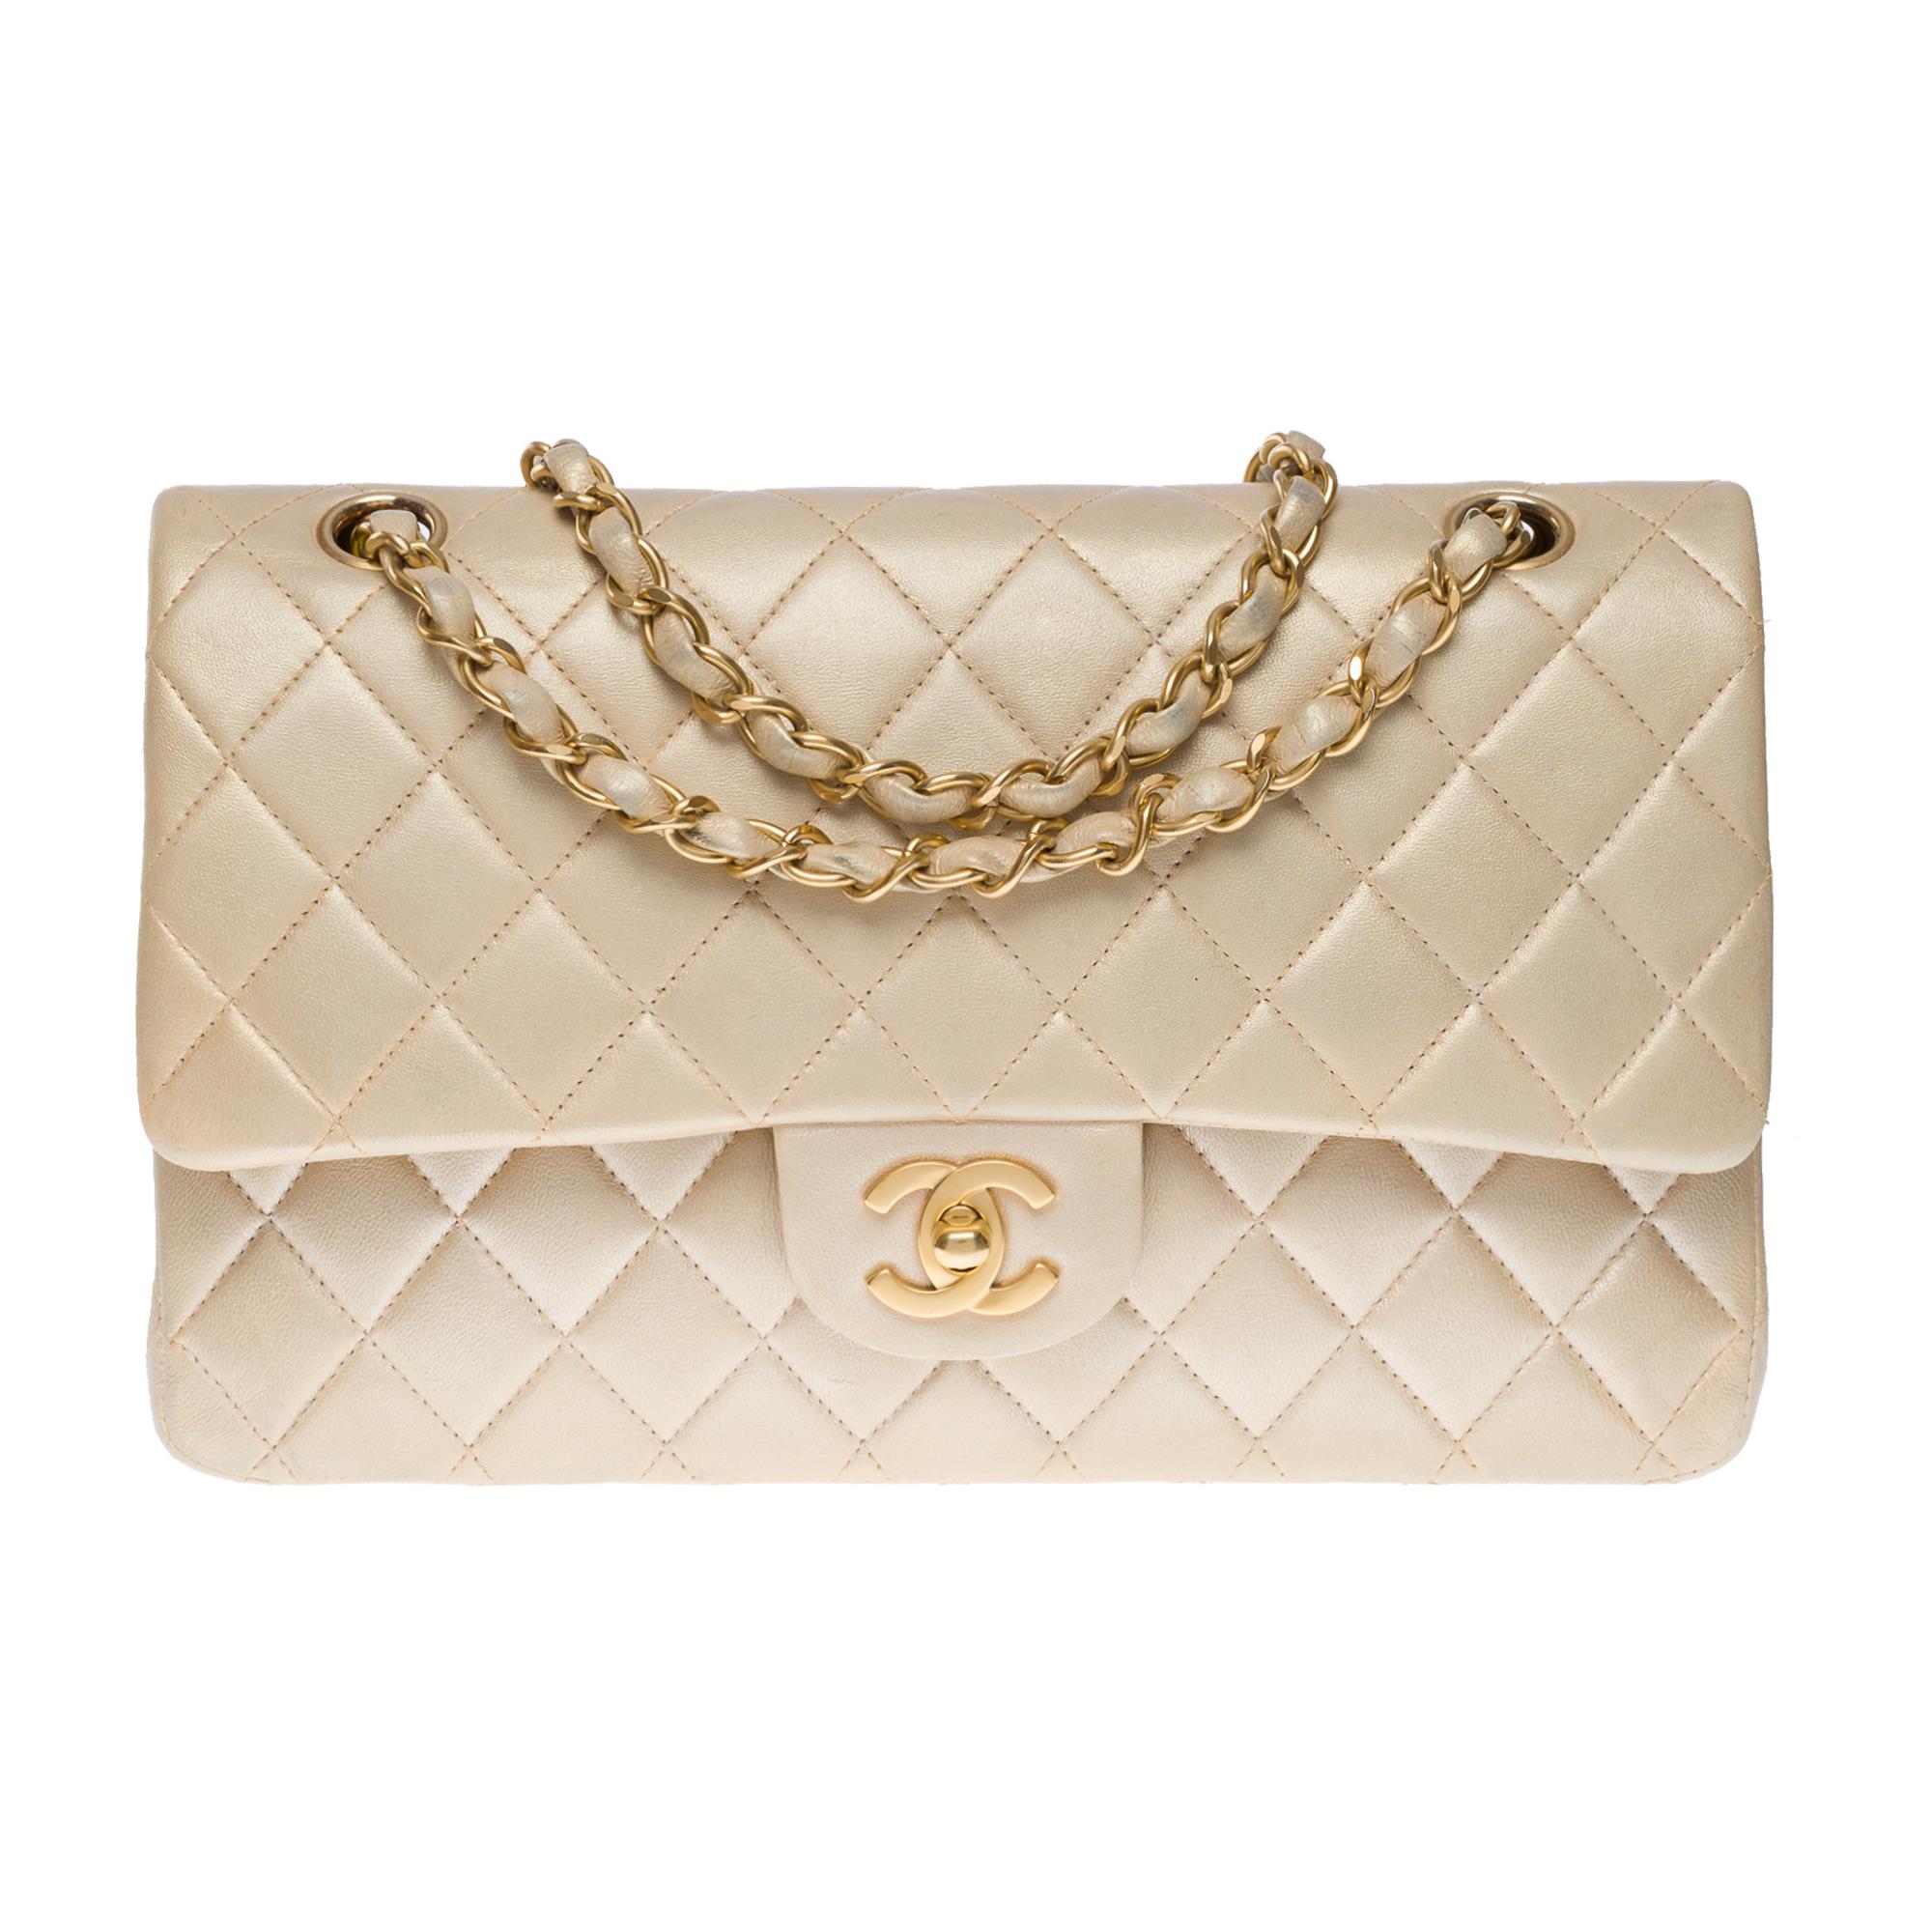 Splendid & Rare Chanel Timeless medium 25 cm double flap shoulder bag in iridescent gold quilted lambskin leather, antique gold metal trim, gold-plated metal chain interwoven with gold leather for a shoulder and shoulder strap

Patch pocket on back